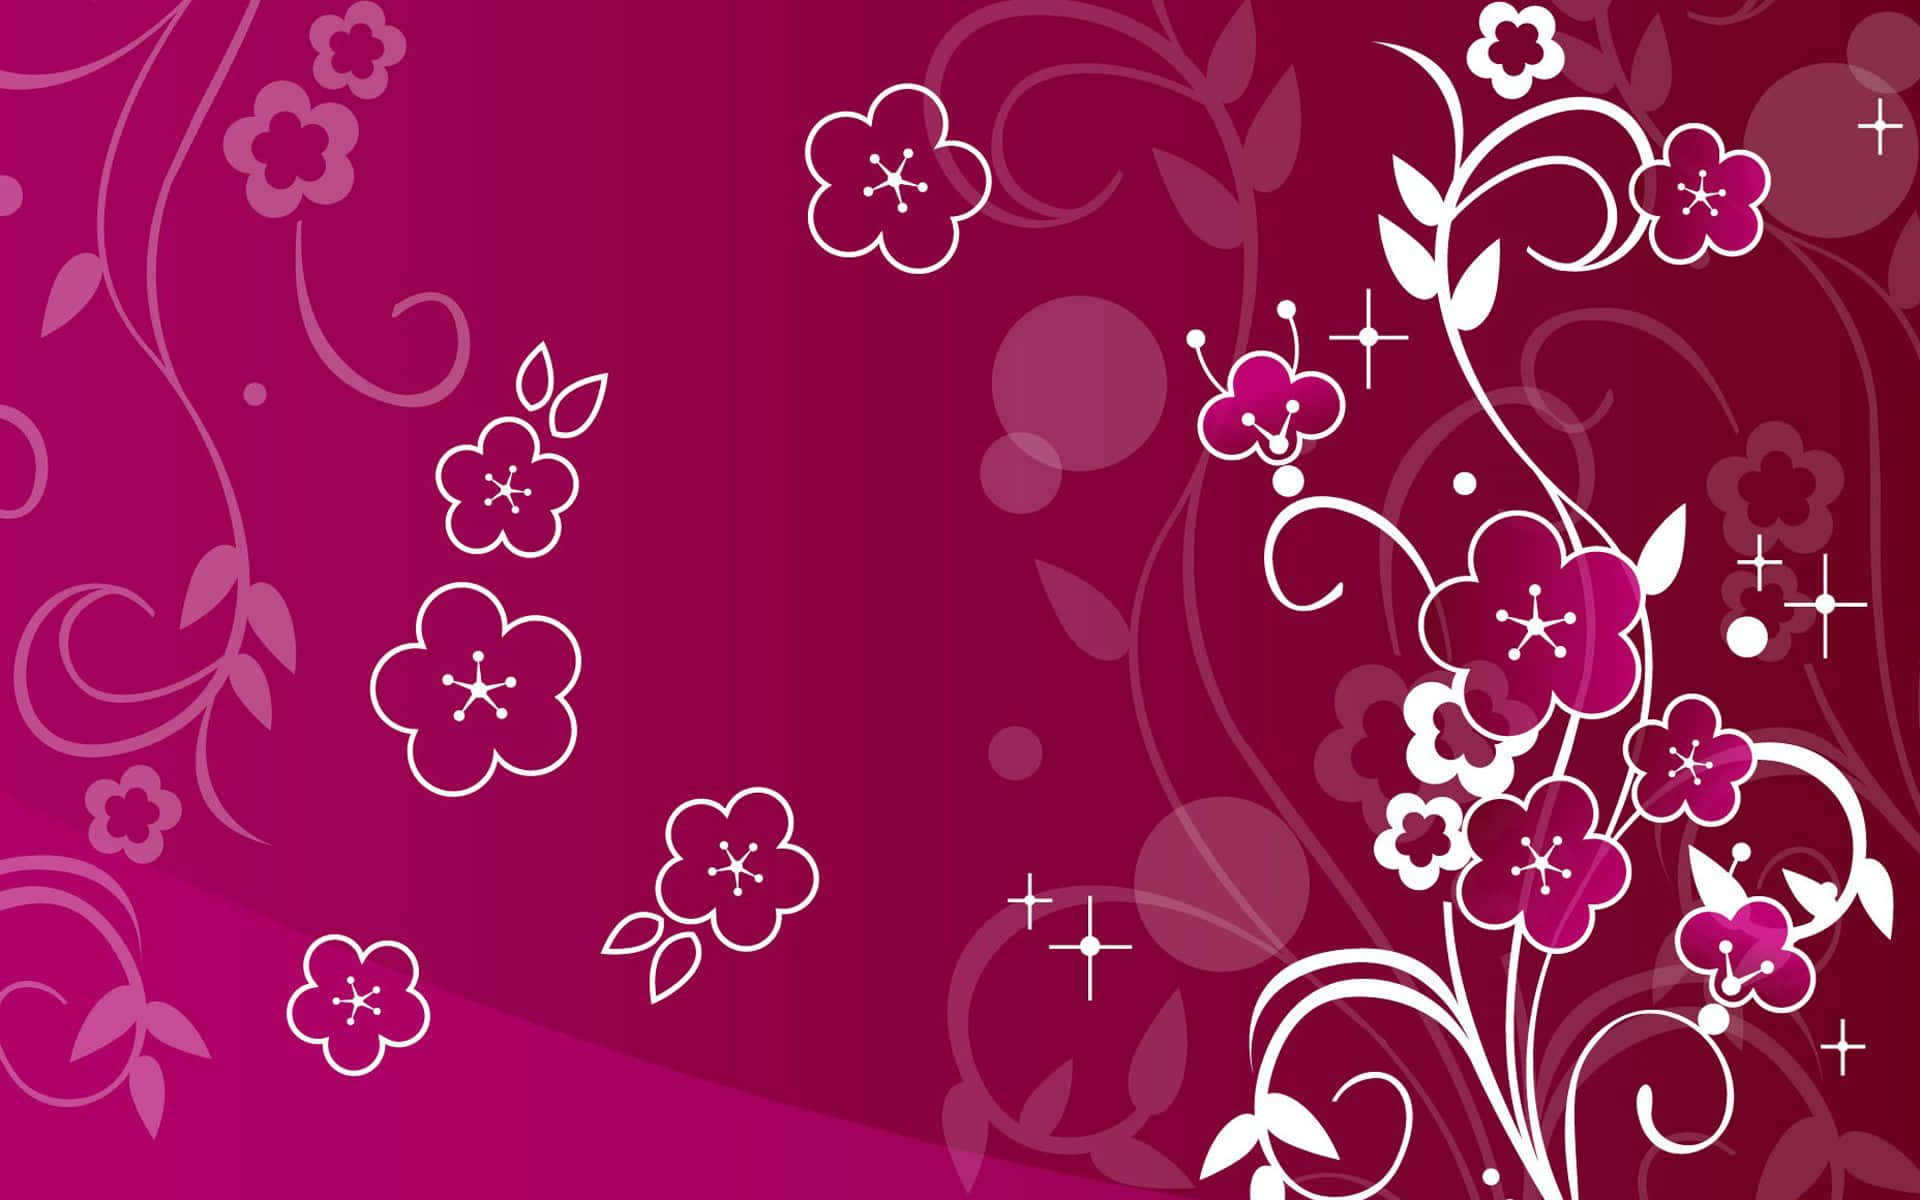 "Fun and Girly - All Things Pink" Wallpaper